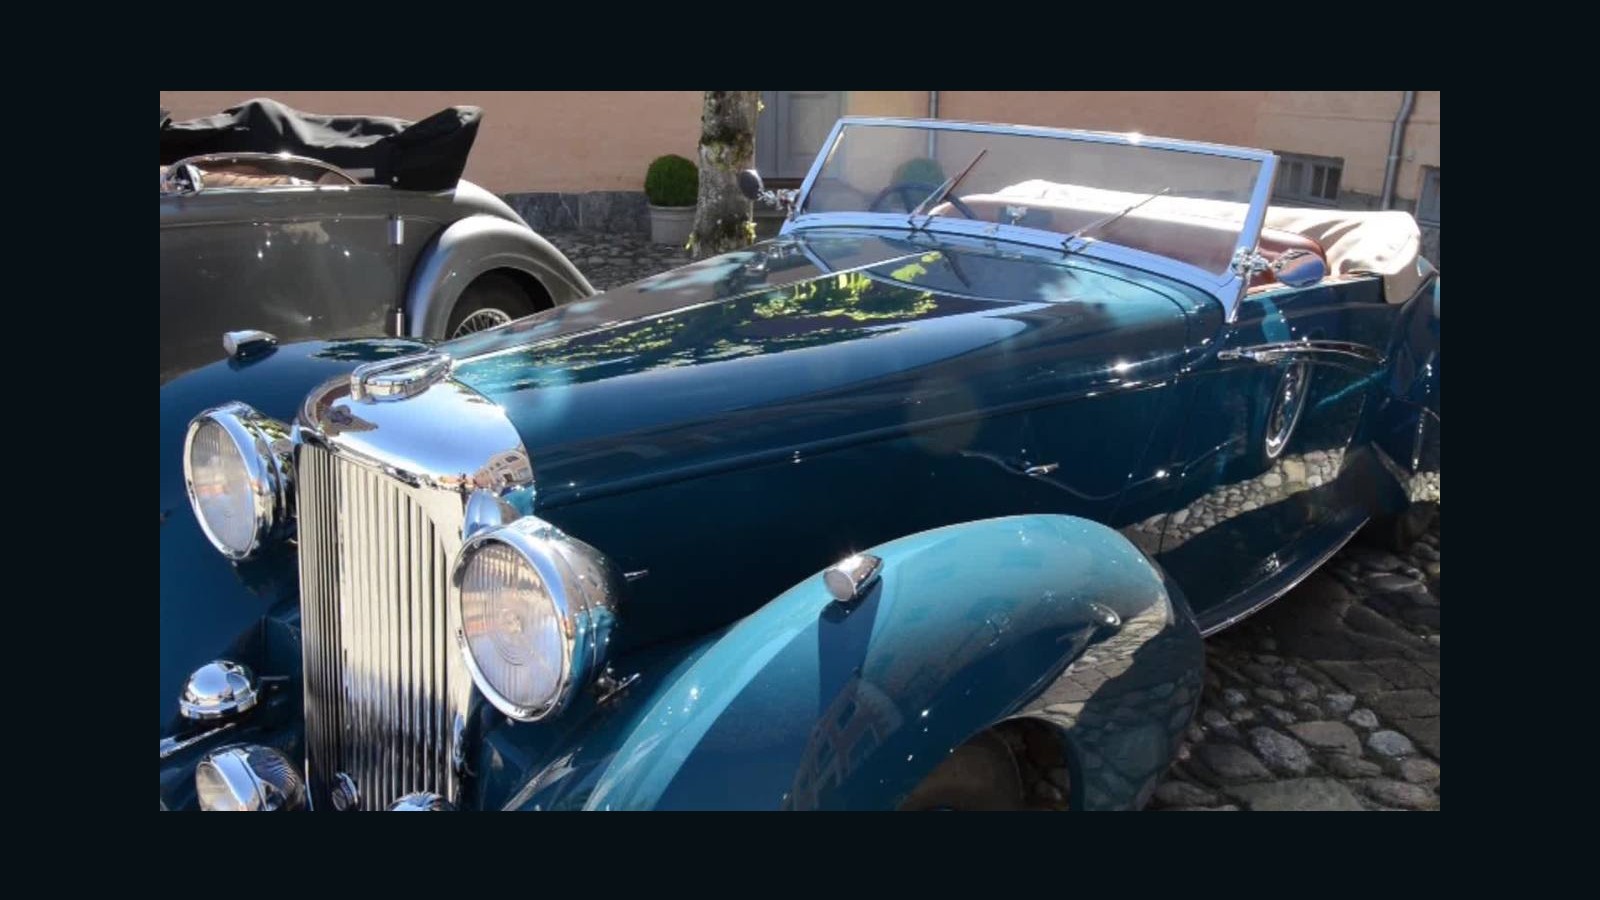 Millionaire puts beautiful car collection up for sale  CNN Video